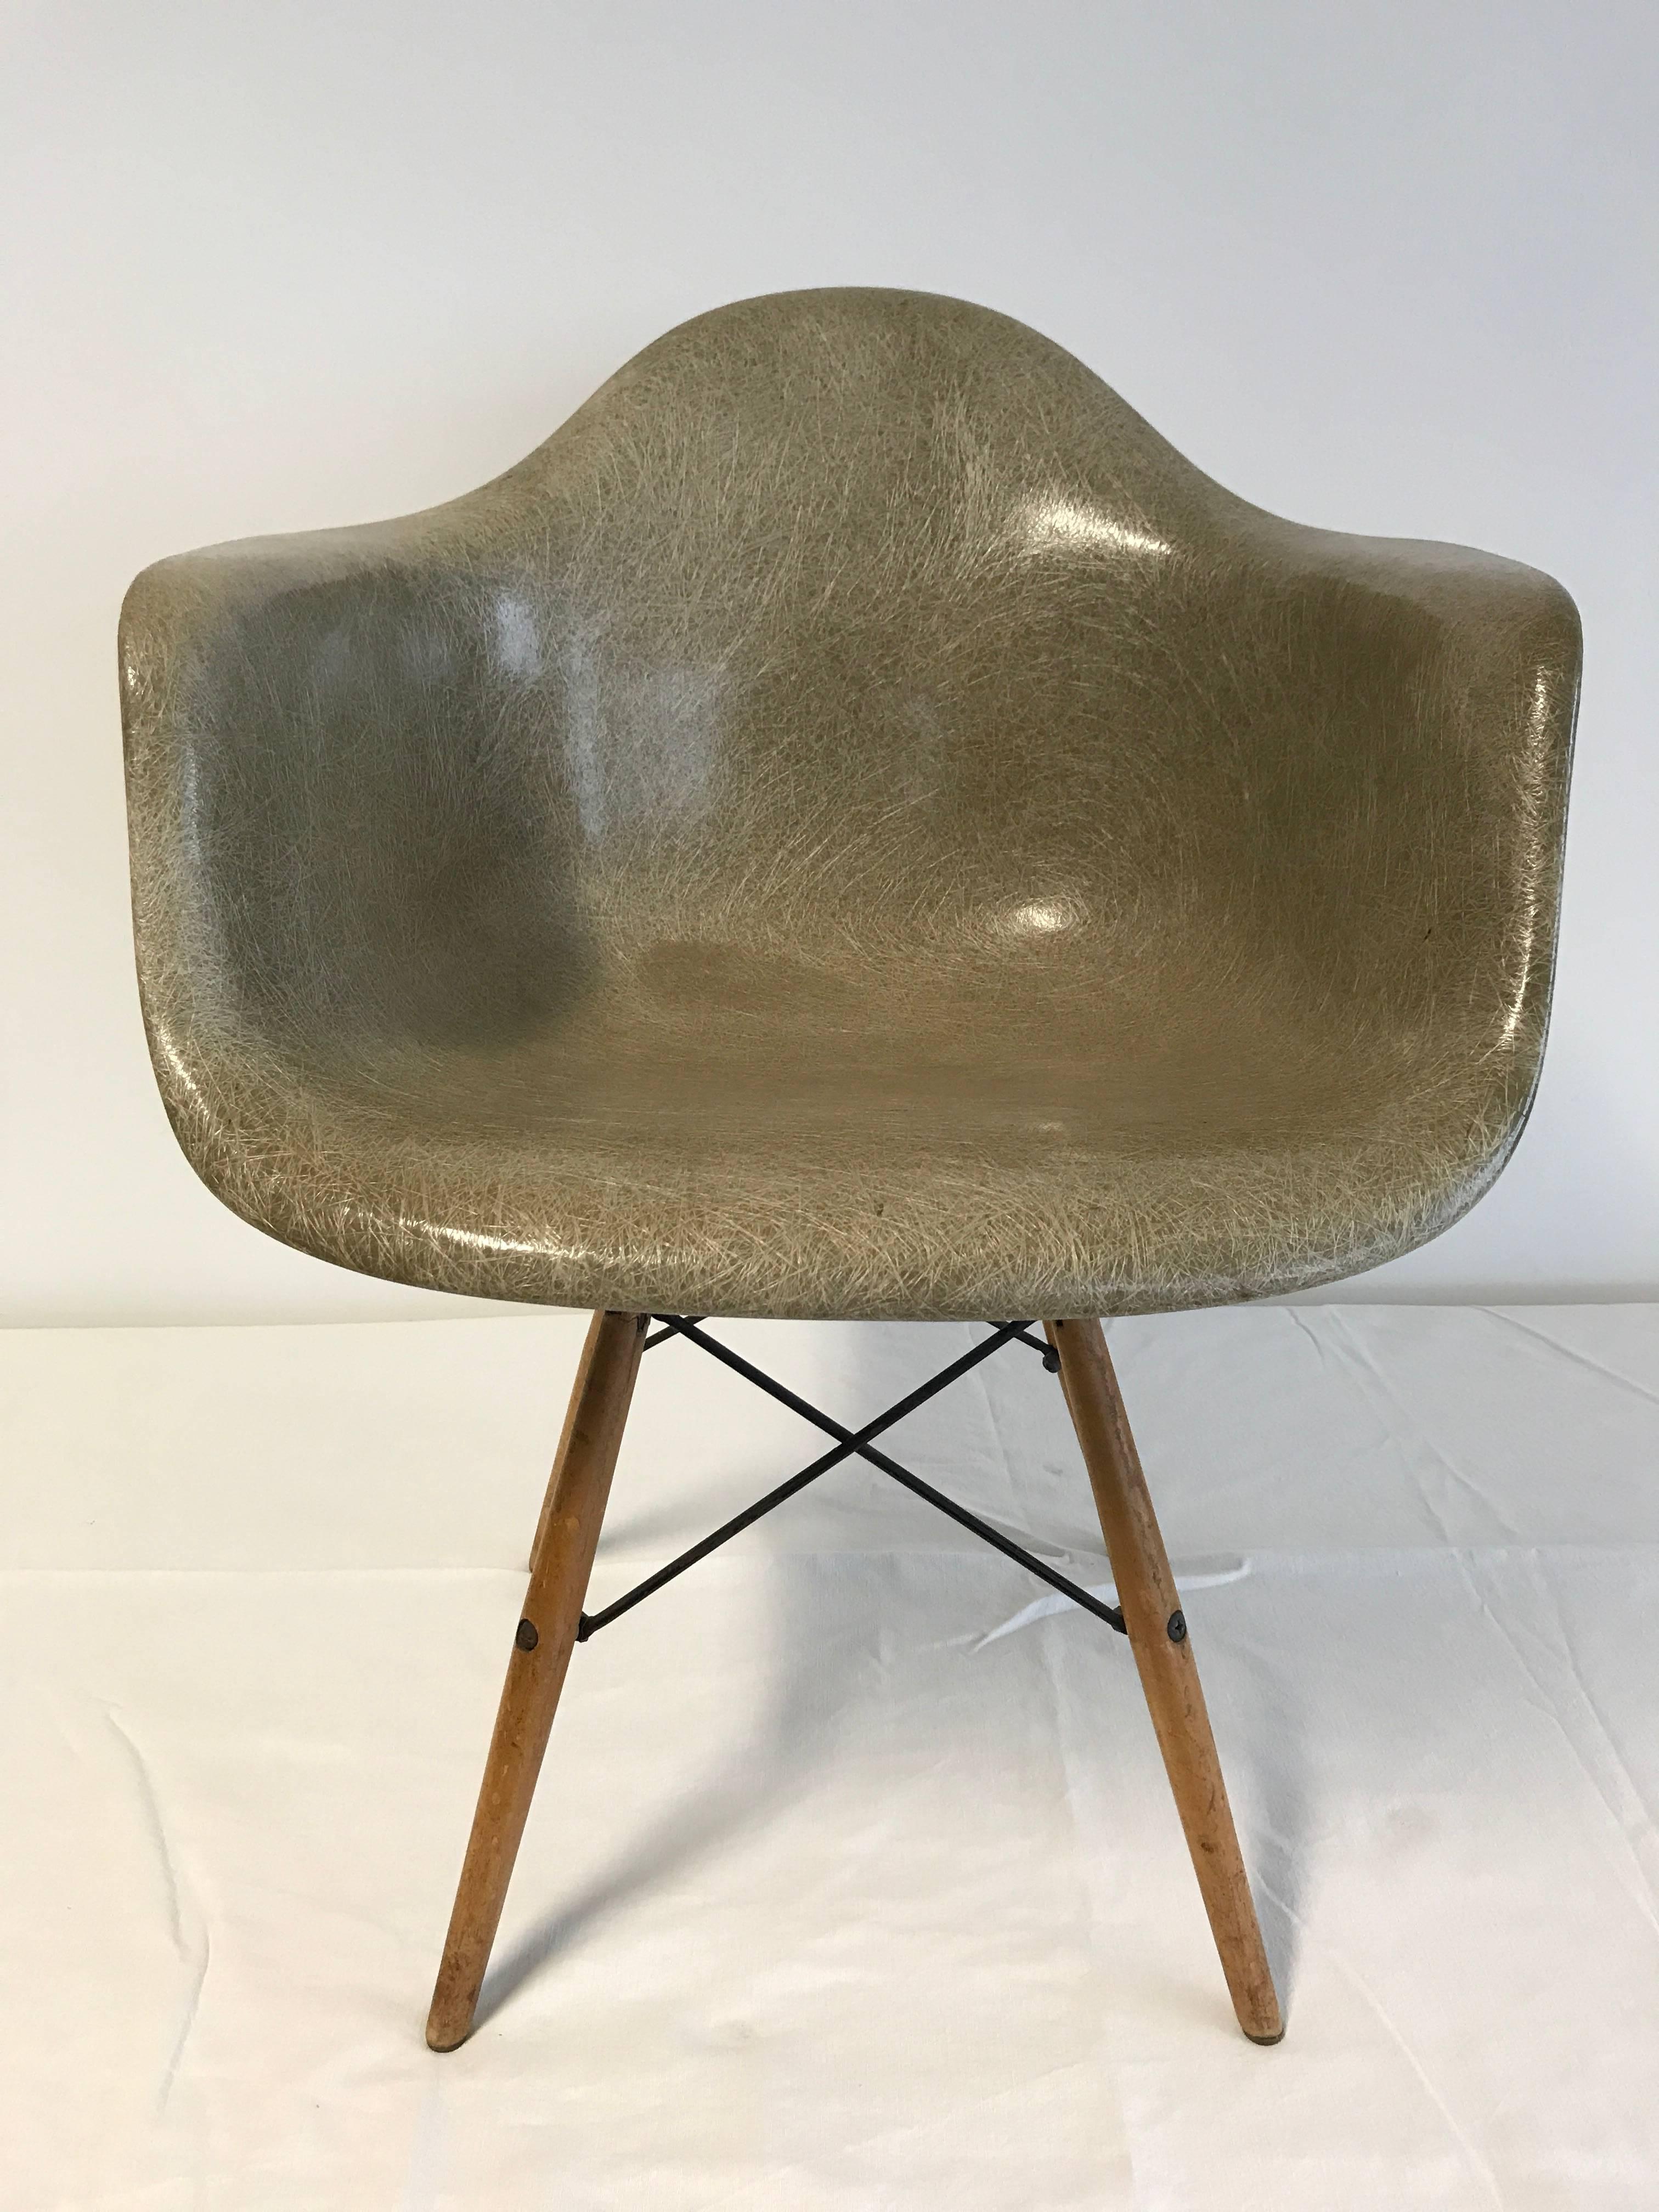 First production / first generation 1949-1950 Zenith Herman Miller / Charles Eames PAW rope swivel chair in color grey elephant / dowel legs in birch / all original parts / the awesome dowel base reads Seng Chicago on the metal portion/ fibre glass